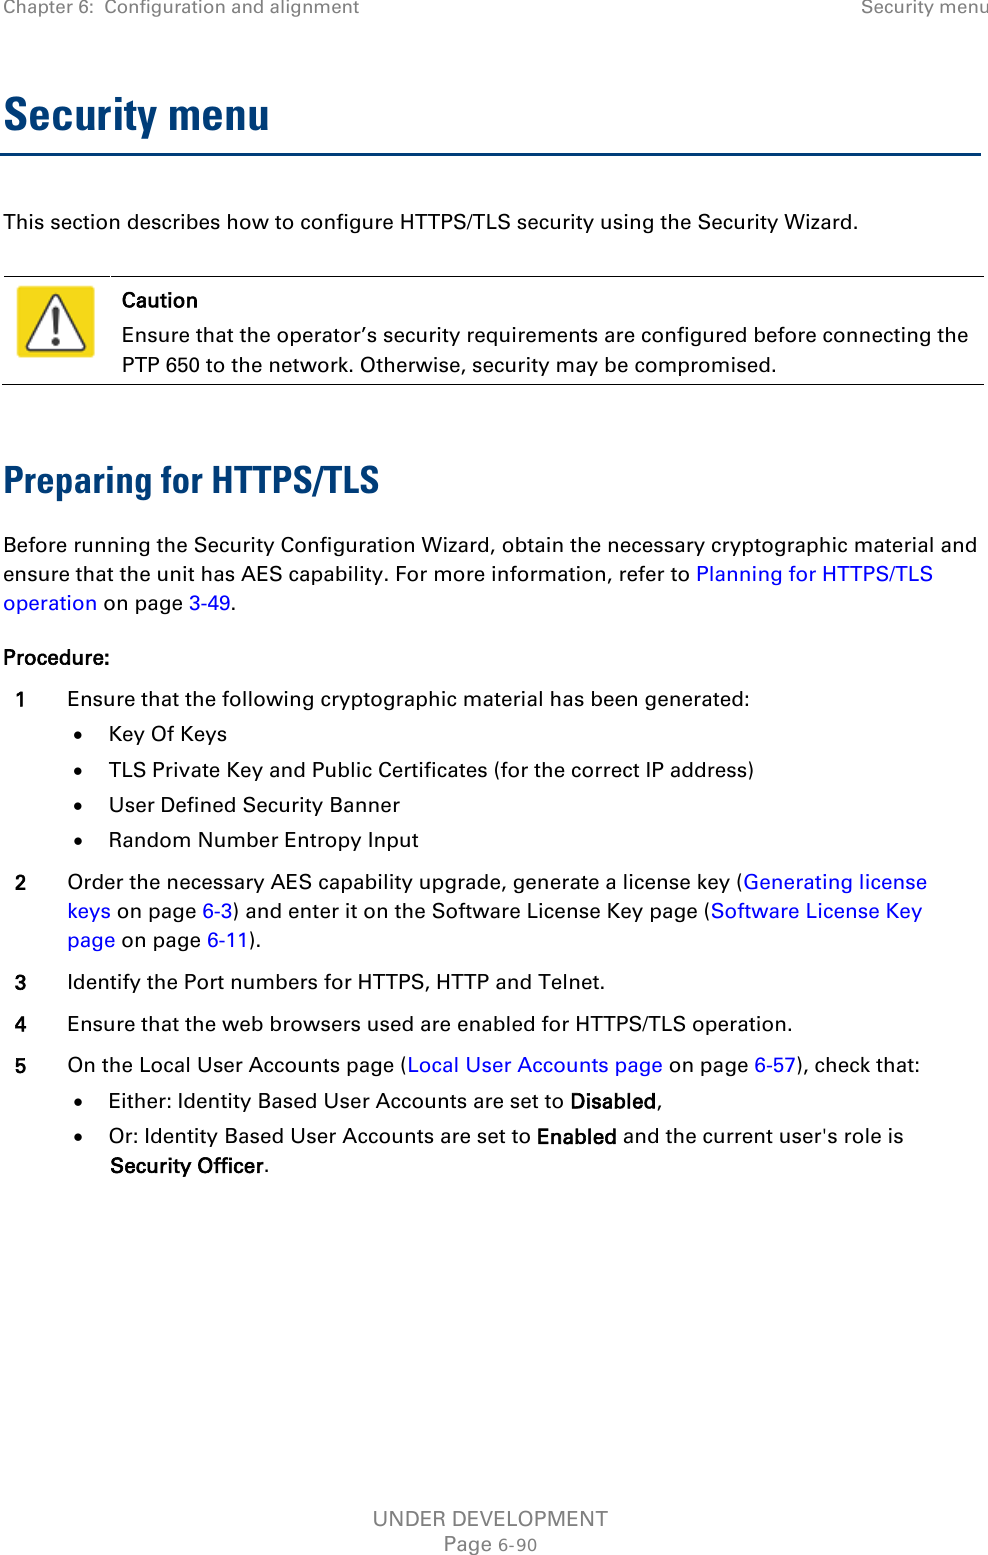 Chapter 6:  Configuration and alignment Security menu  Security menu This section describes how to configure HTTPS/TLS security using the Security Wizard.   Caution Ensure that the operator’s security requirements are configured before connecting the PTP 650 to the network. Otherwise, security may be compromised.  Preparing for HTTPS/TLS Before running the Security Configuration Wizard, obtain the necessary cryptographic material and ensure that the unit has AES capability. For more information, refer to Planning for HTTPS/TLS operation on page 3-49. Procedure: 1 Ensure that the following cryptographic material has been generated: • Key Of Keys • TLS Private Key and Public Certificates (for the correct IP address) • User Defined Security Banner • Random Number Entropy Input 2 Order the necessary AES capability upgrade, generate a license key (Generating license keys on page 6-3) and enter it on the Software License Key page (Software License Key page on page 6-11). 3 Identify the Port numbers for HTTPS, HTTP and Telnet. 4 Ensure that the web browsers used are enabled for HTTPS/TLS operation. 5 On the Local User Accounts page (Local User Accounts page on page 6-57), check that: • Either: Identity Based User Accounts are set to Disabled, • Or: Identity Based User Accounts are set to Enabled and the current user&apos;s role is Security Officer.  UNDER DEVELOPMENT Page 6-90 